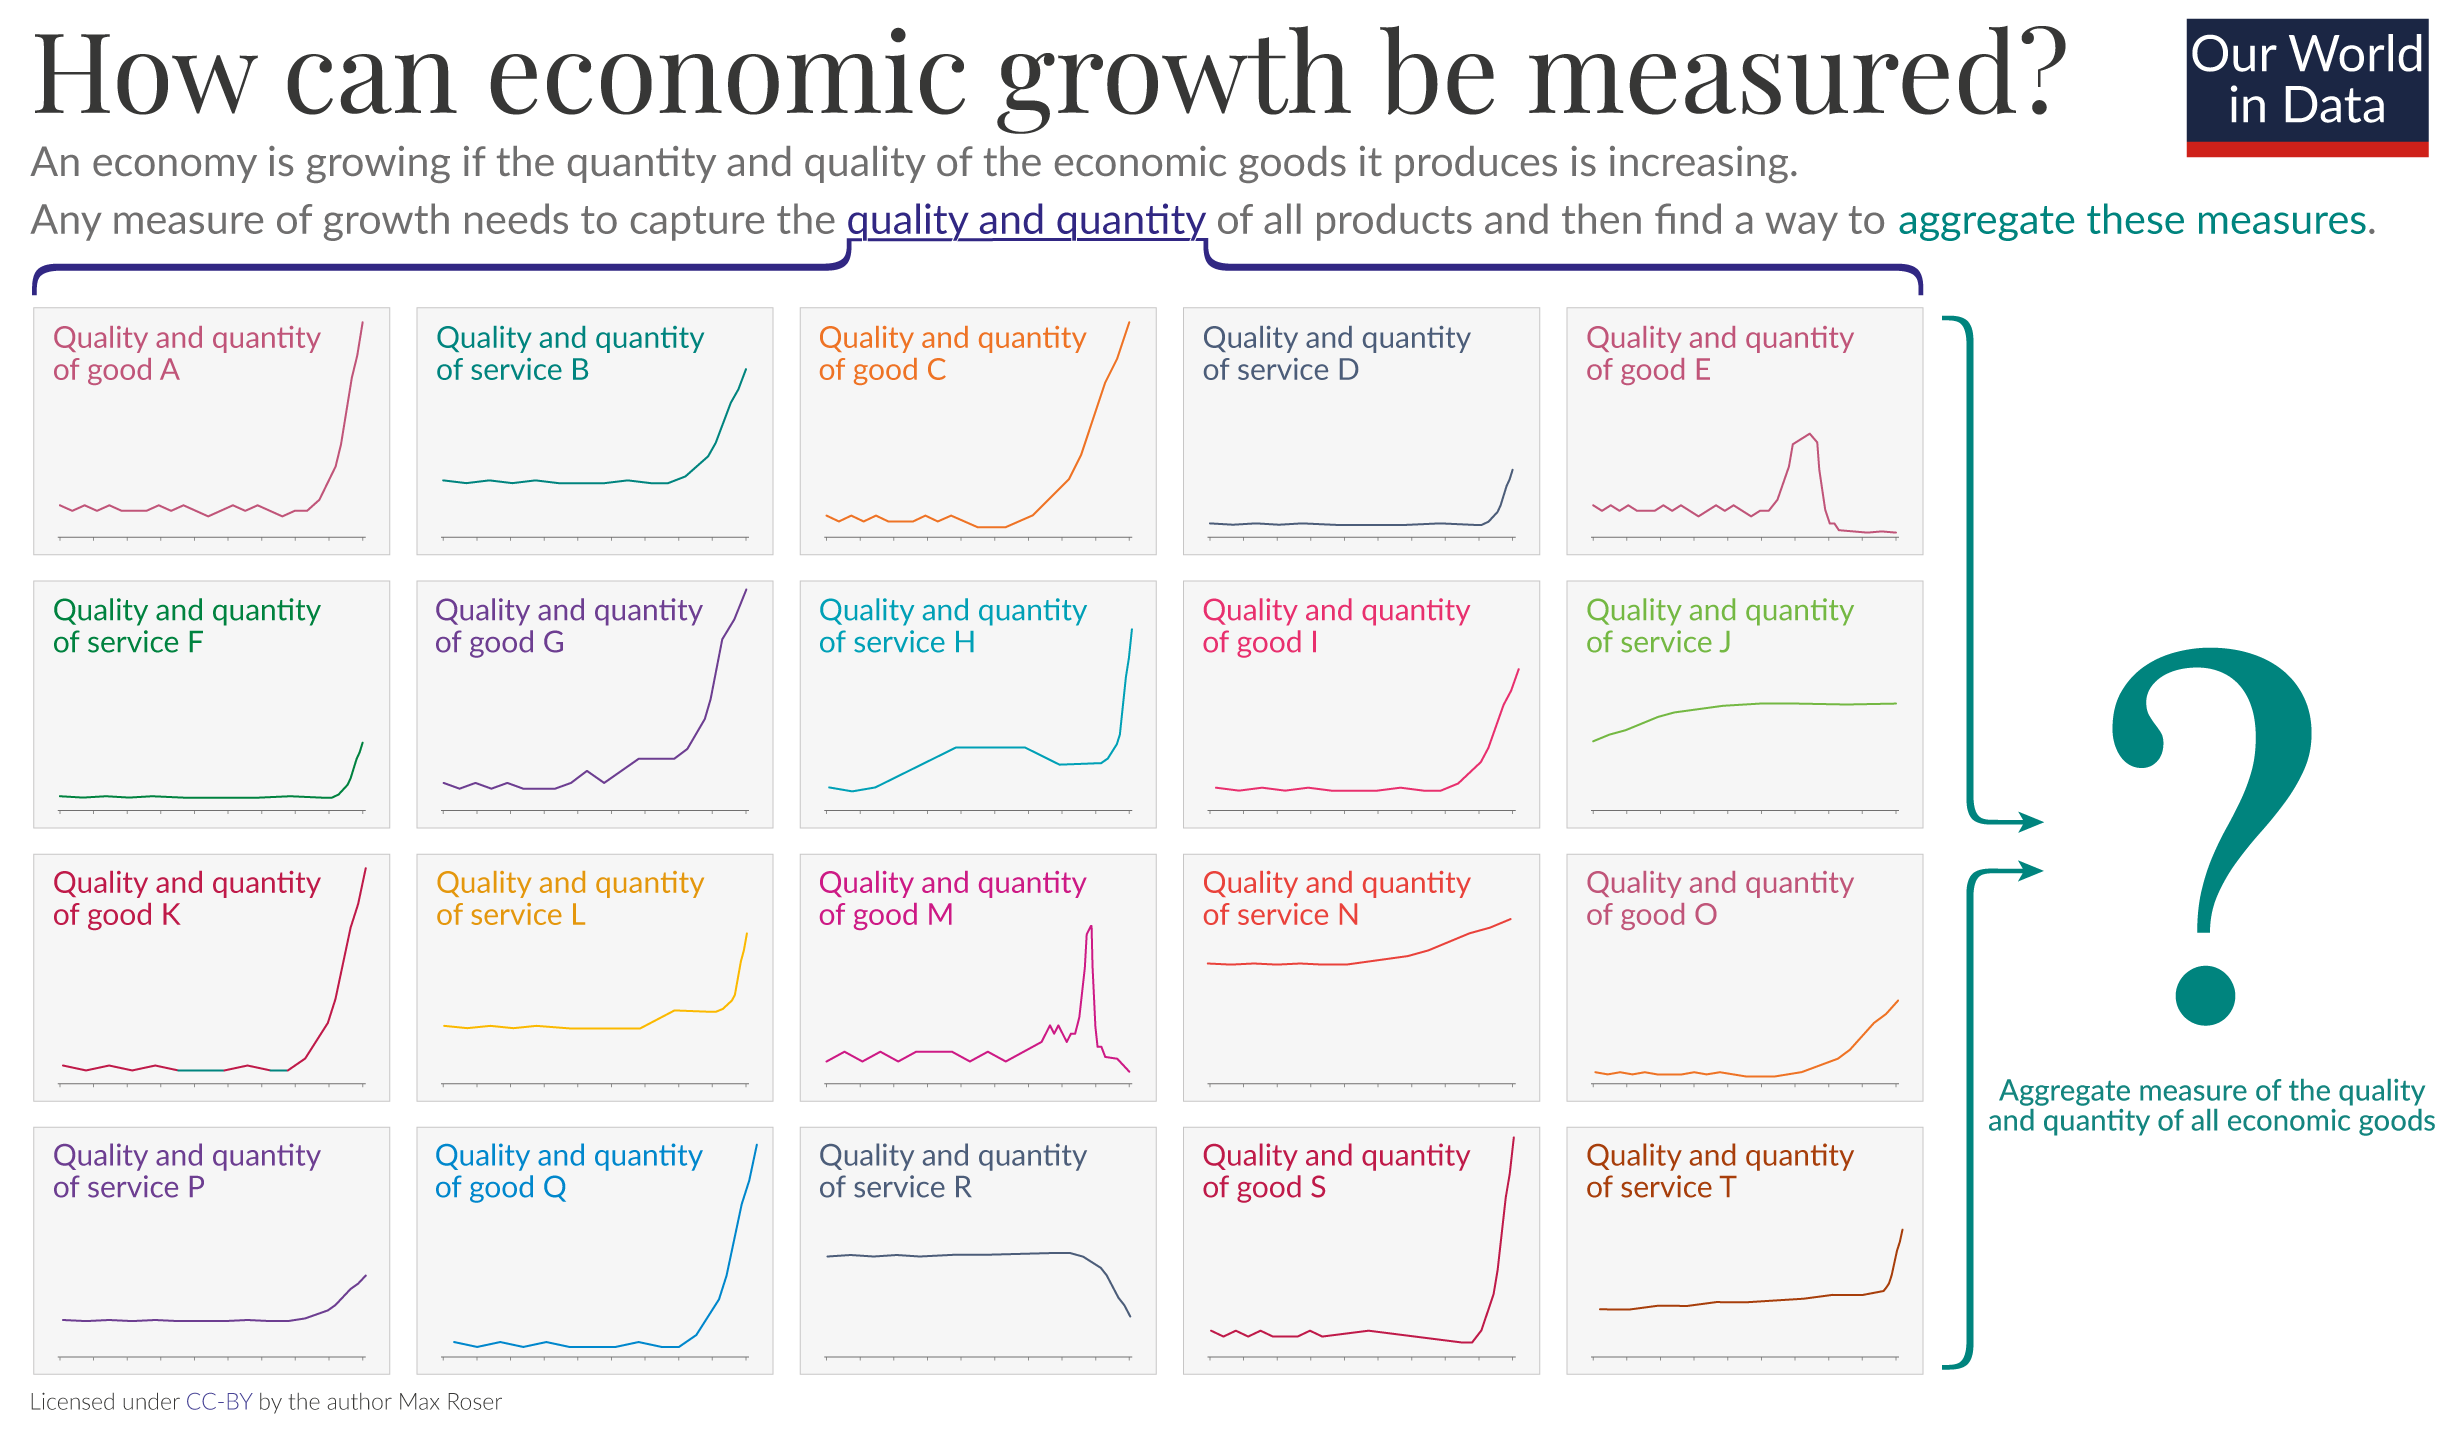 How can growth be measured